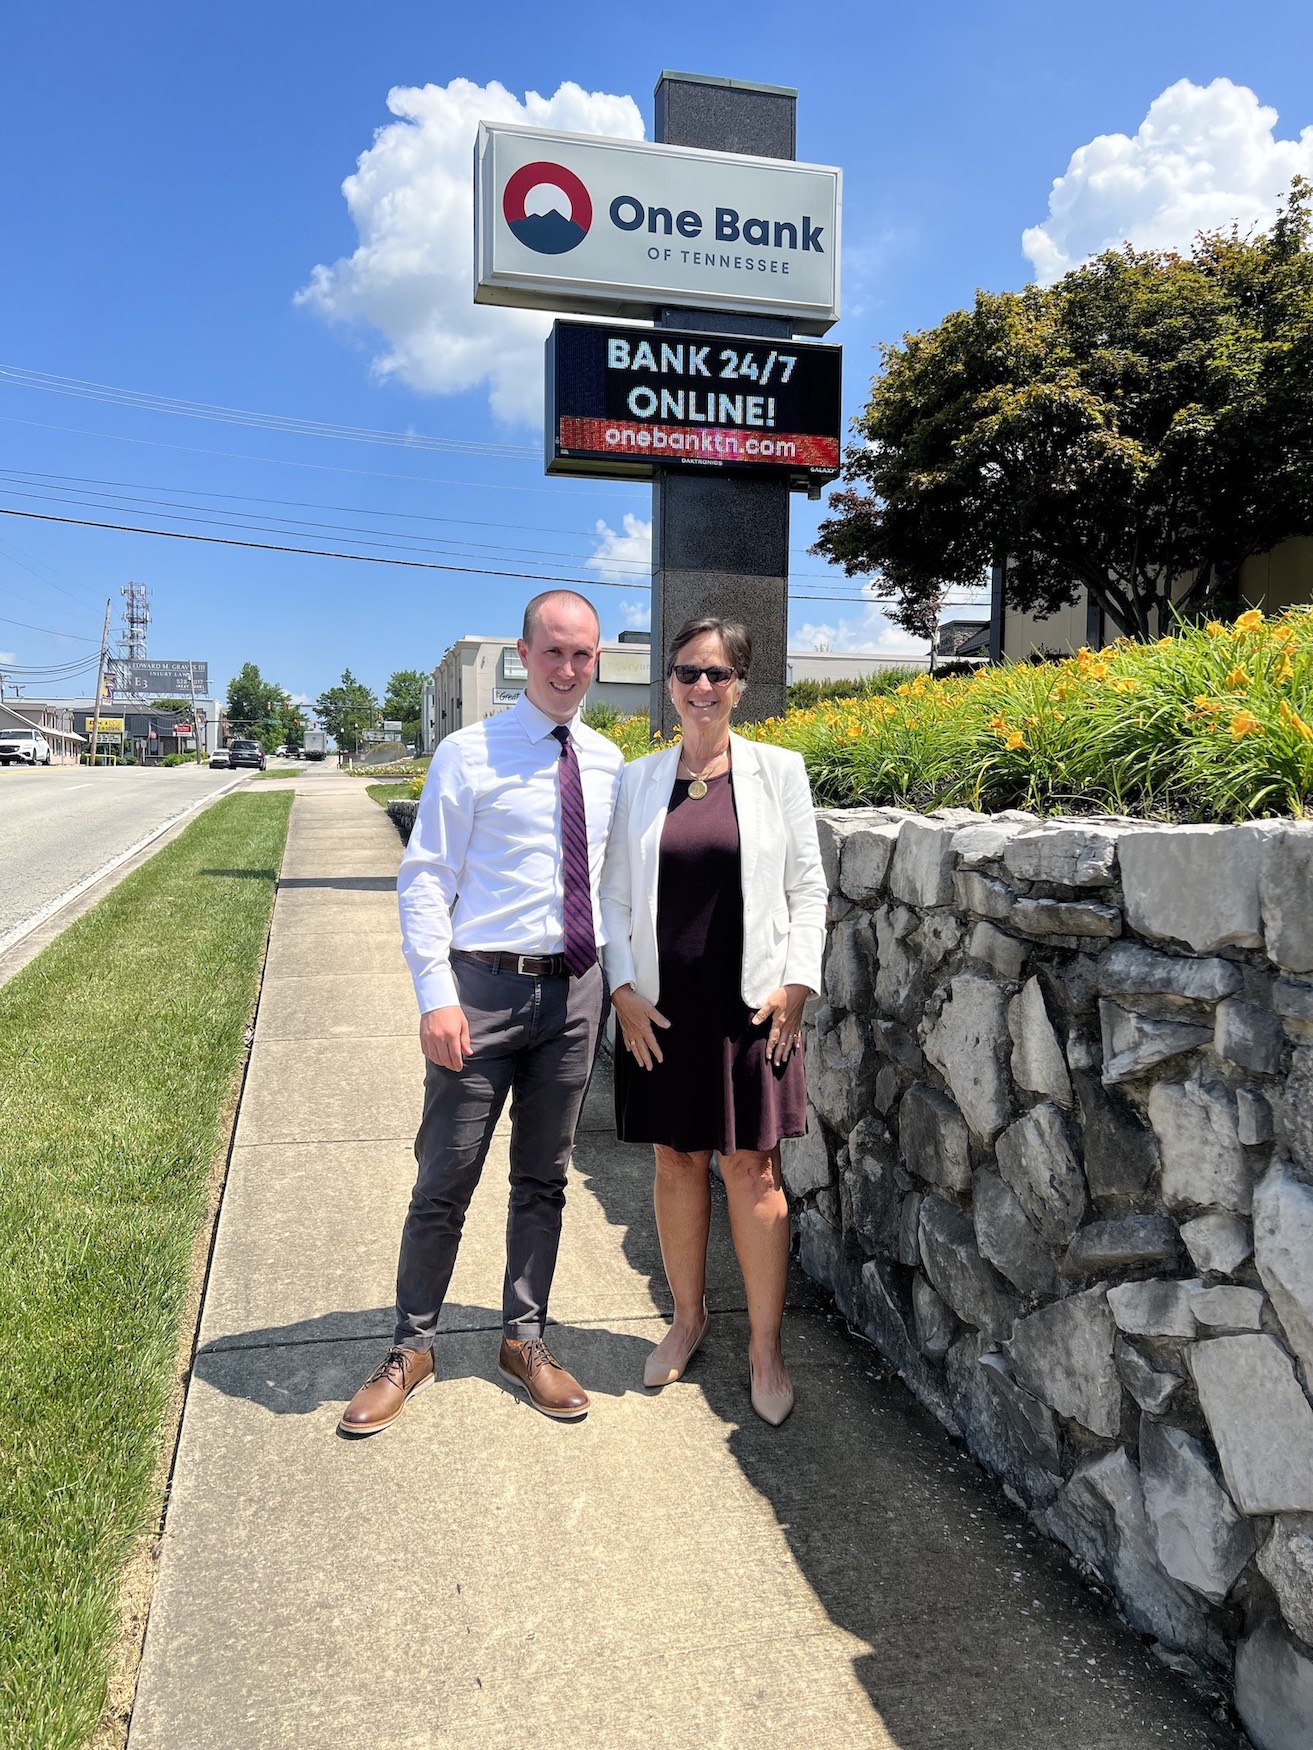 a man and woman stand in front of the sign for One Bank